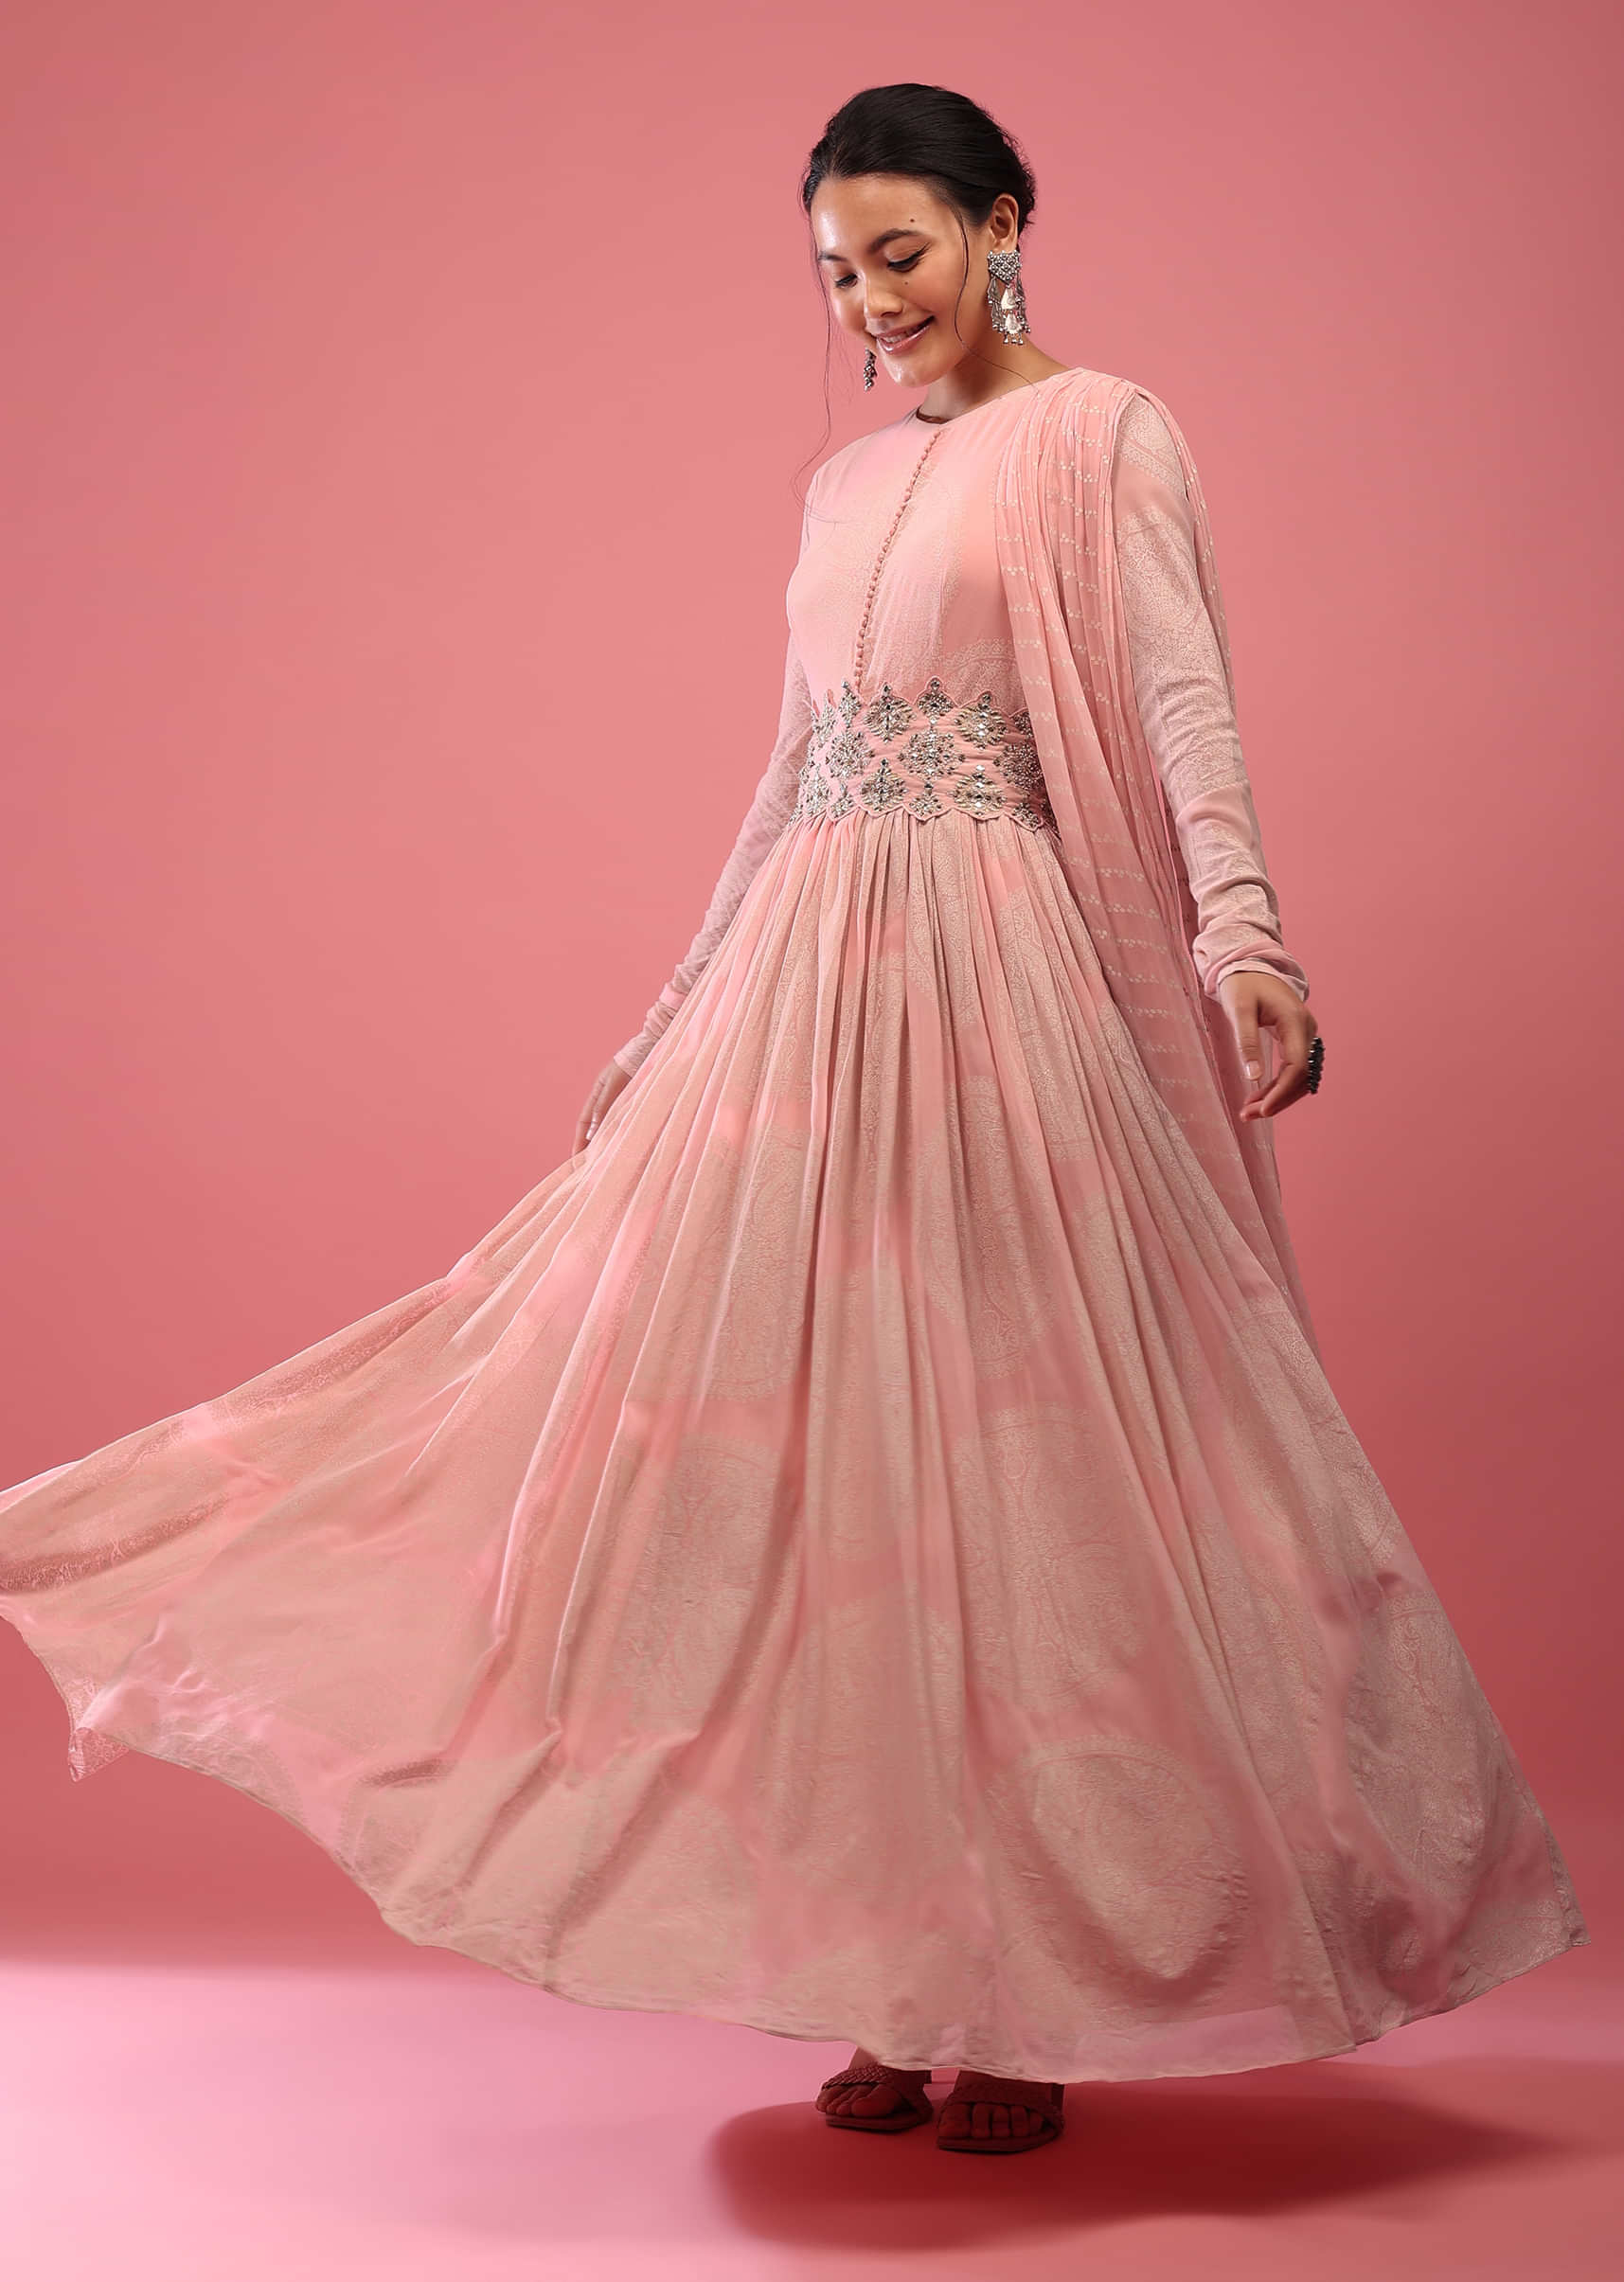 Dogwood Pink Anarkali Suit In Georgette With Attached Dupatta And Floral Embroidered Waistbelt